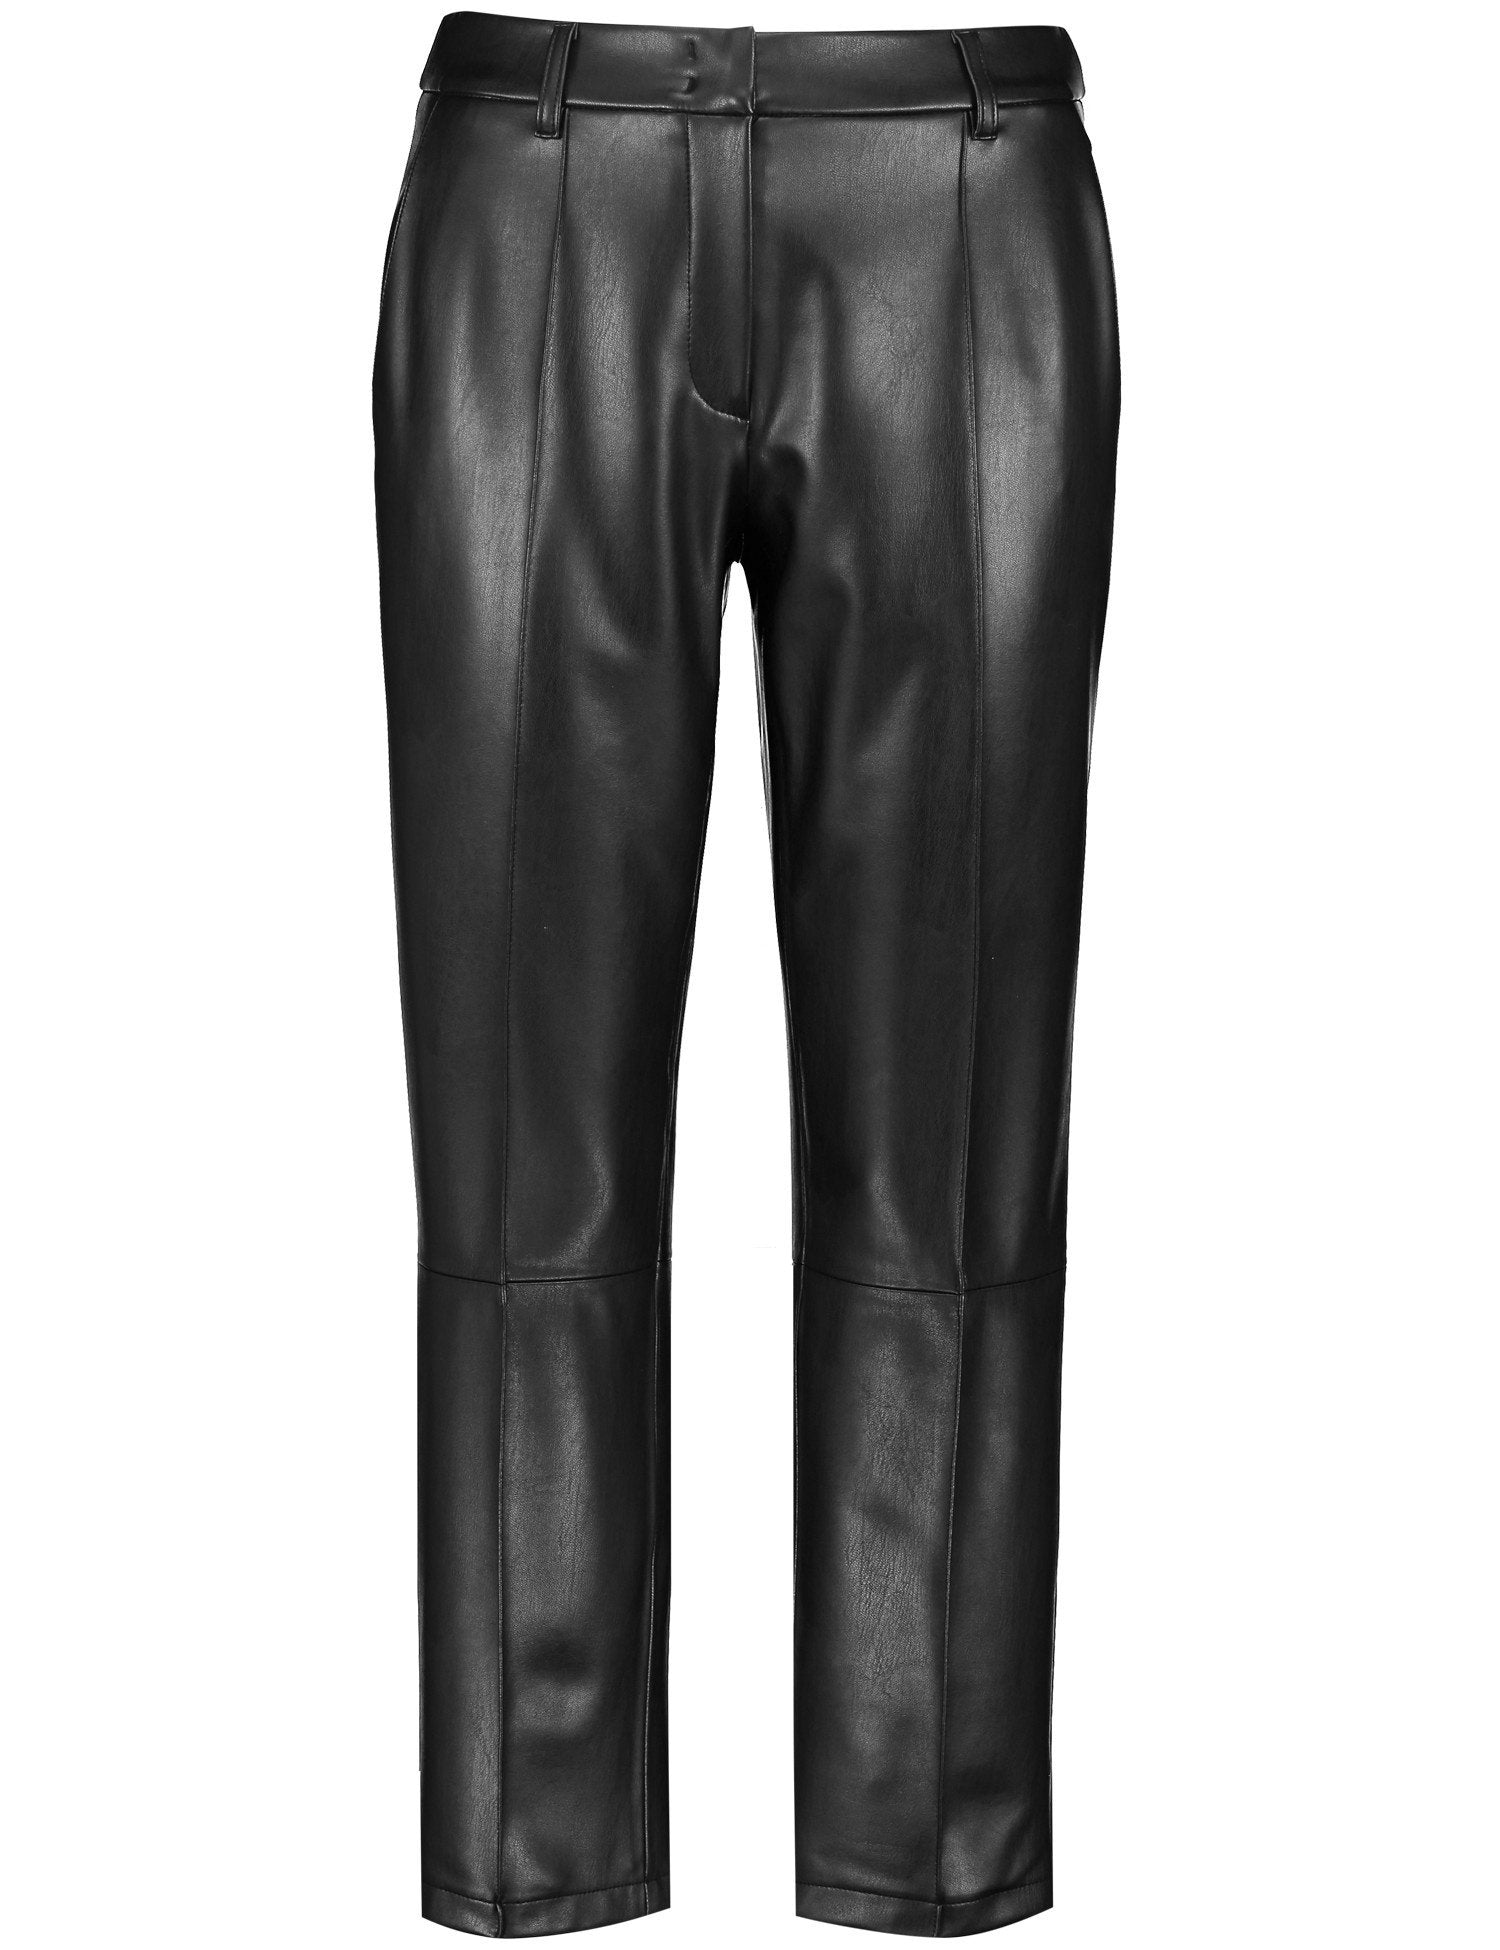 City Style 7/8 Length Faux Leather Trousers_122017-66778_11000_02